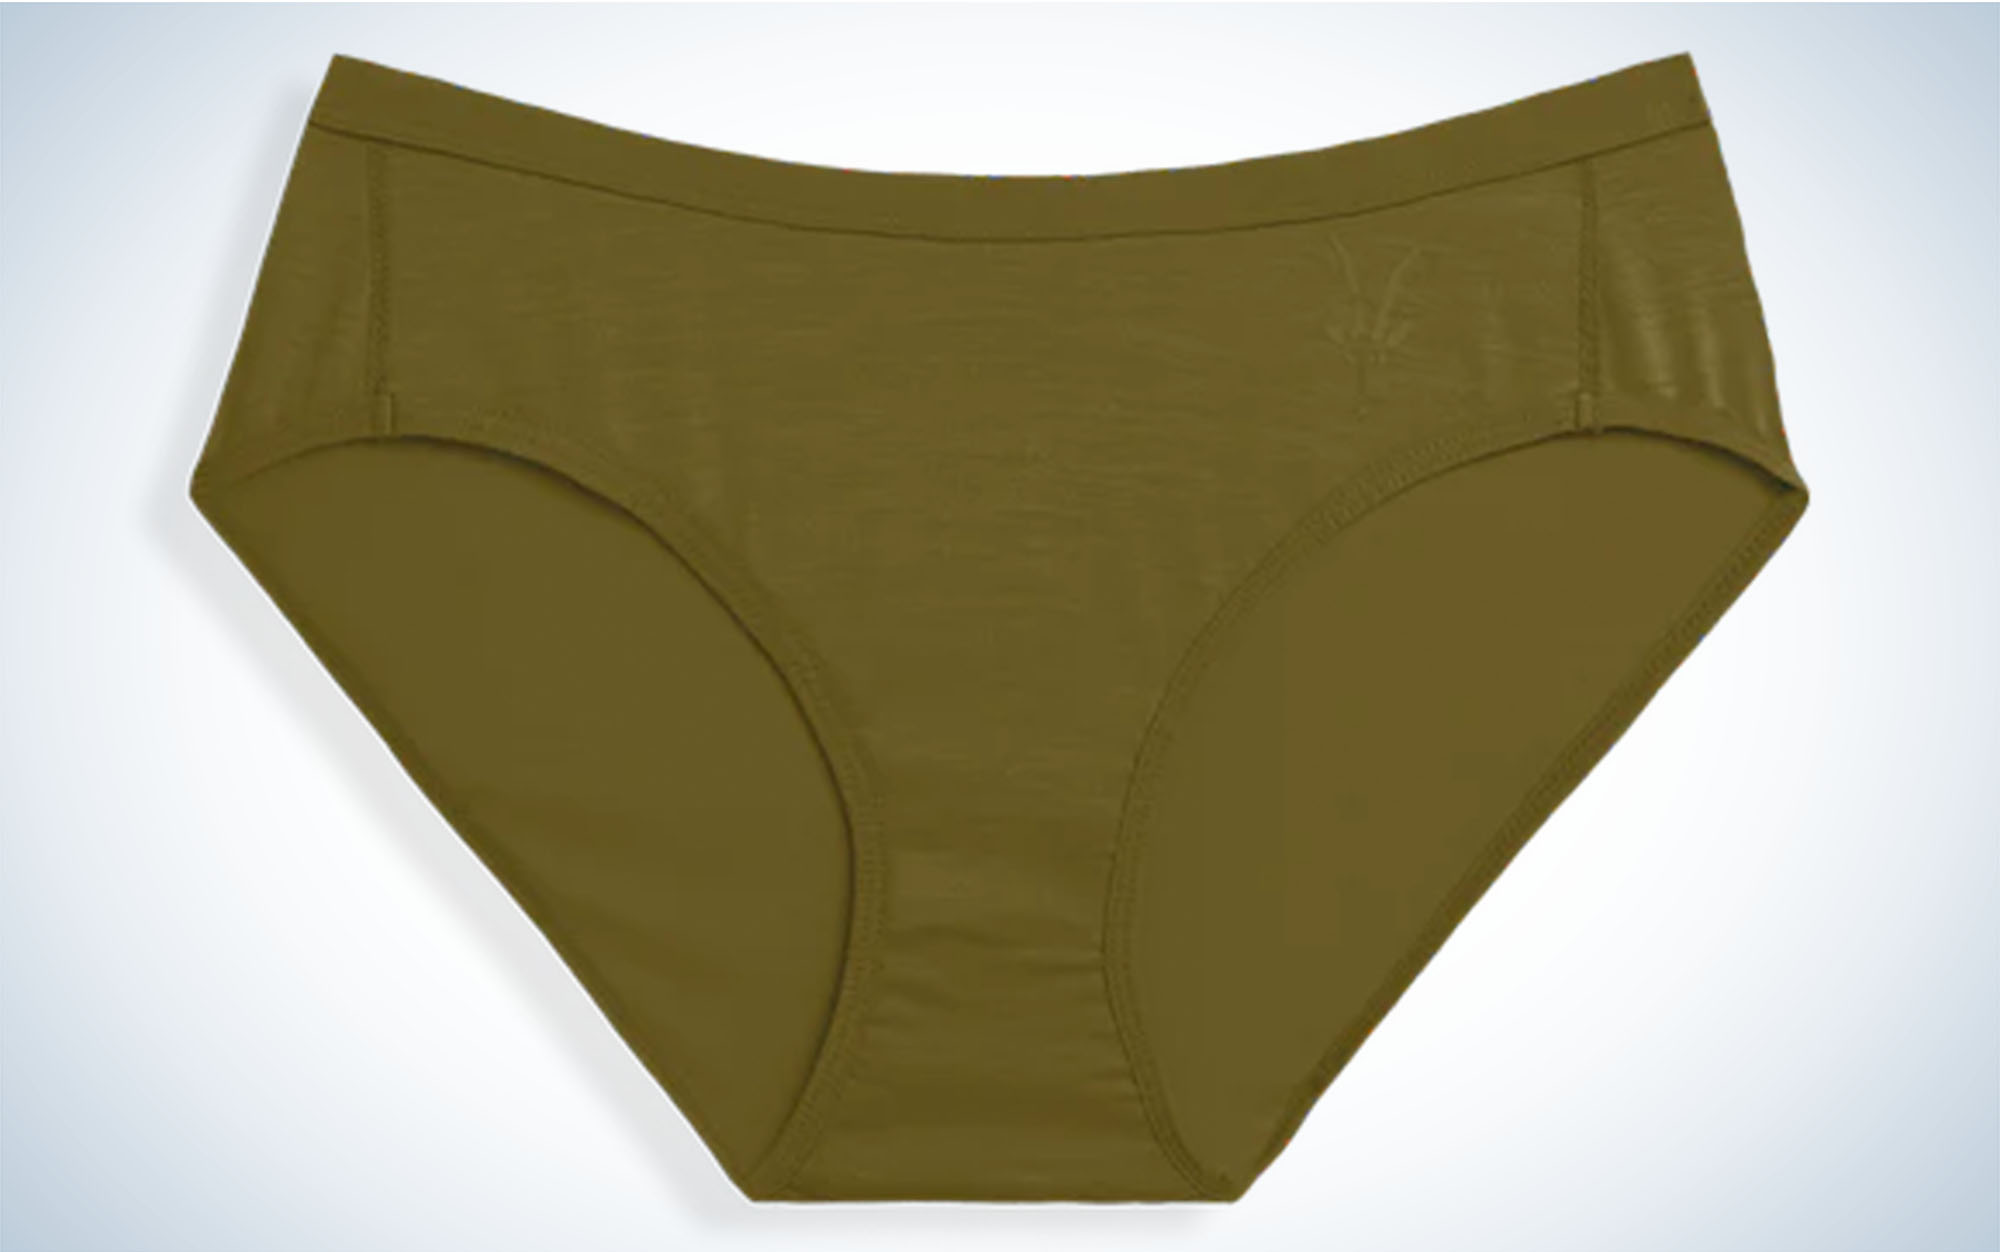 How to Choose Hiking Underwear